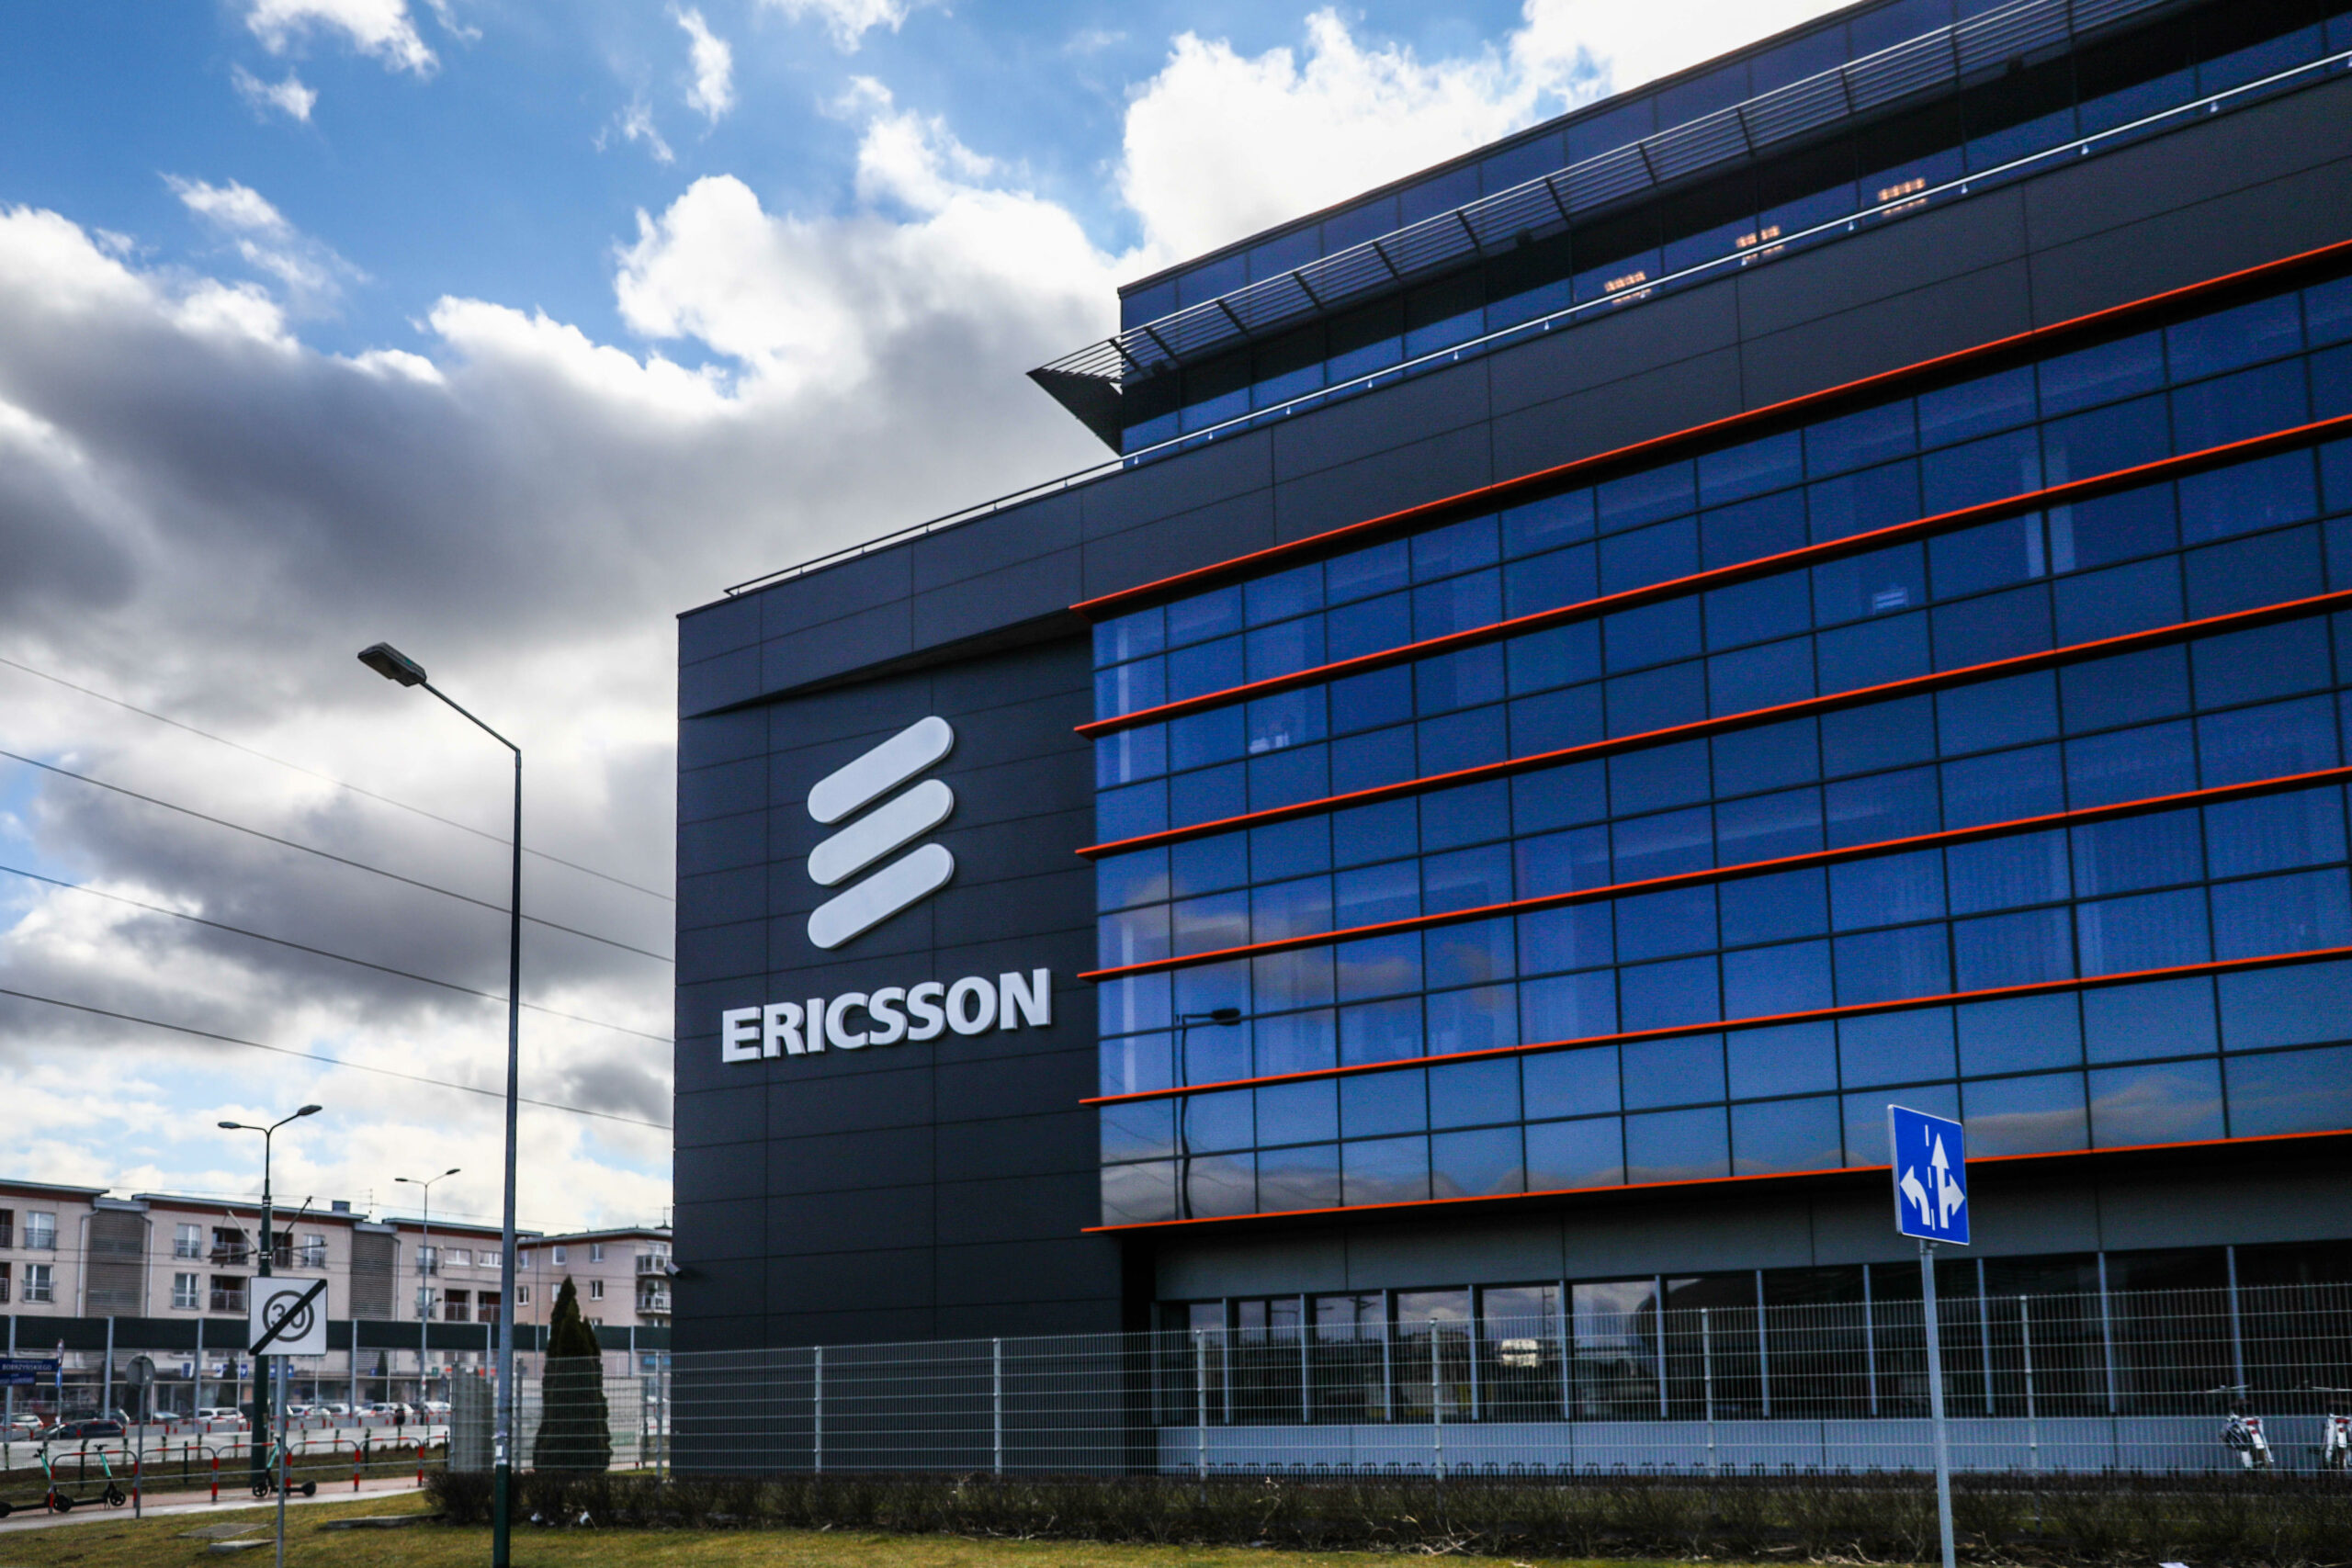 As part of the continent-wide #AfricaInMotion campaign, Ericsson and its partners have contributed to laying the foundation for the country's digital transformation